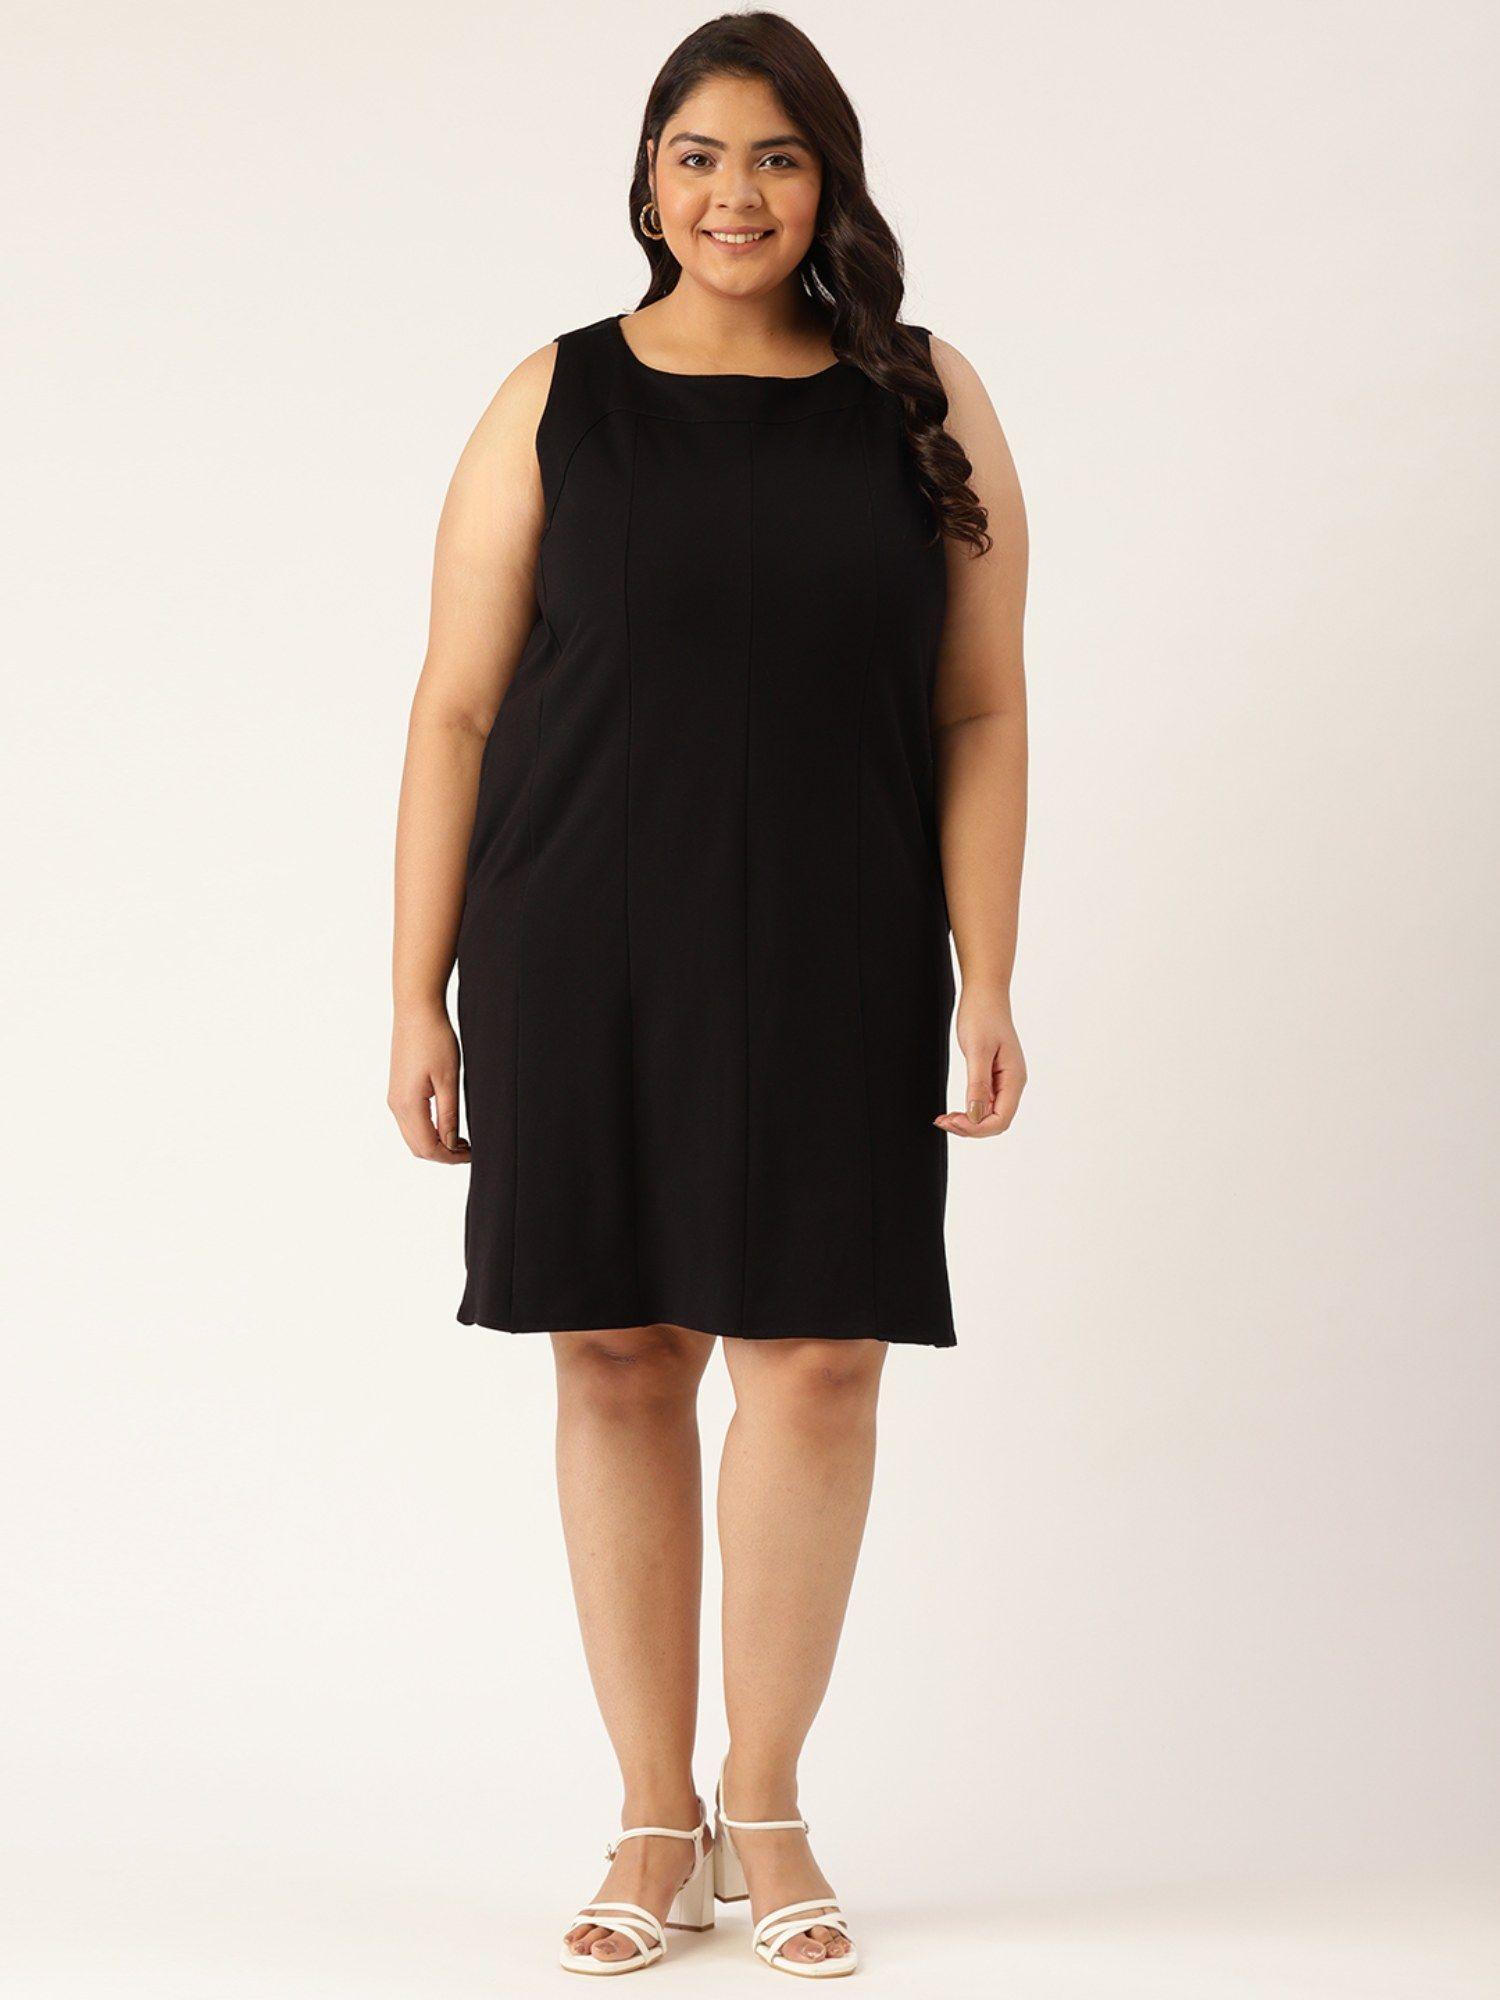 plus-size-womens-black-solid-color-knitted-sheath-dress